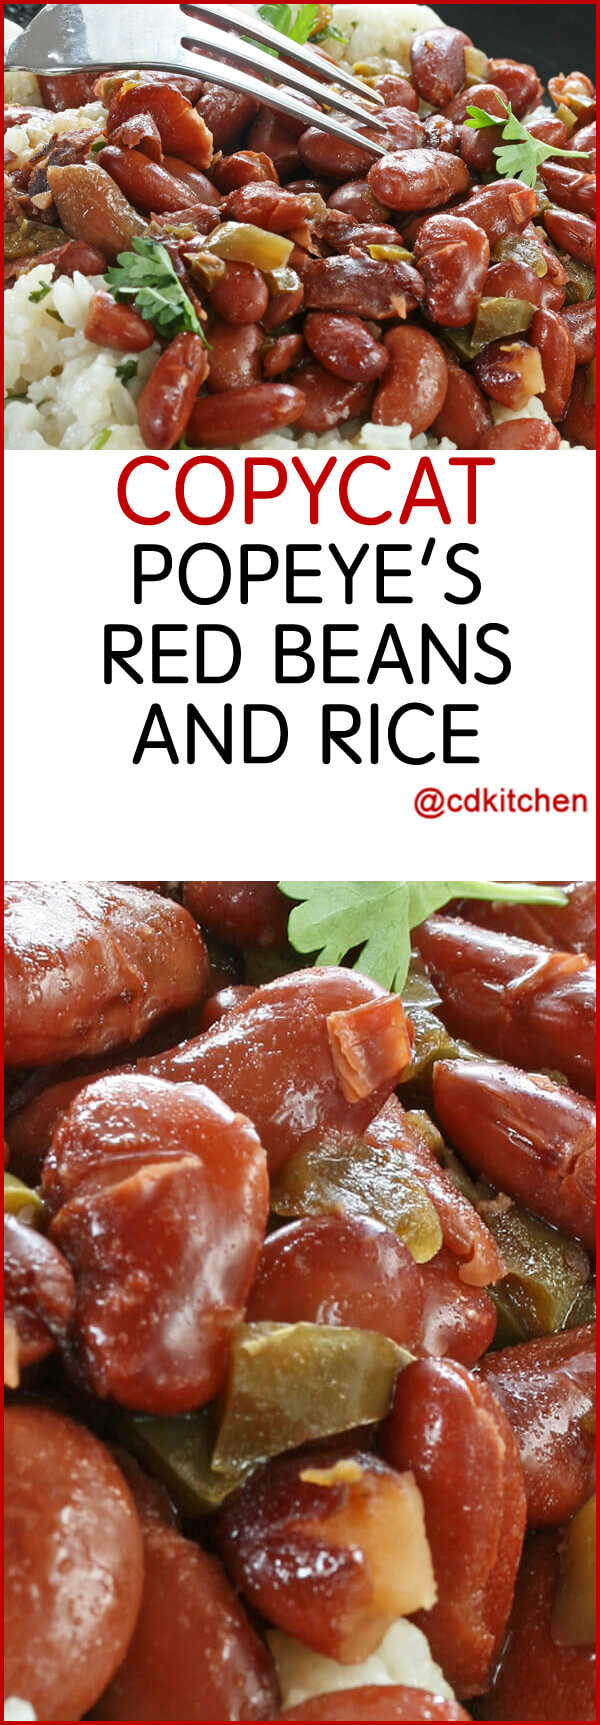 Popeyes Red Beans And Rice
 popeyes recipe for red beans and rice